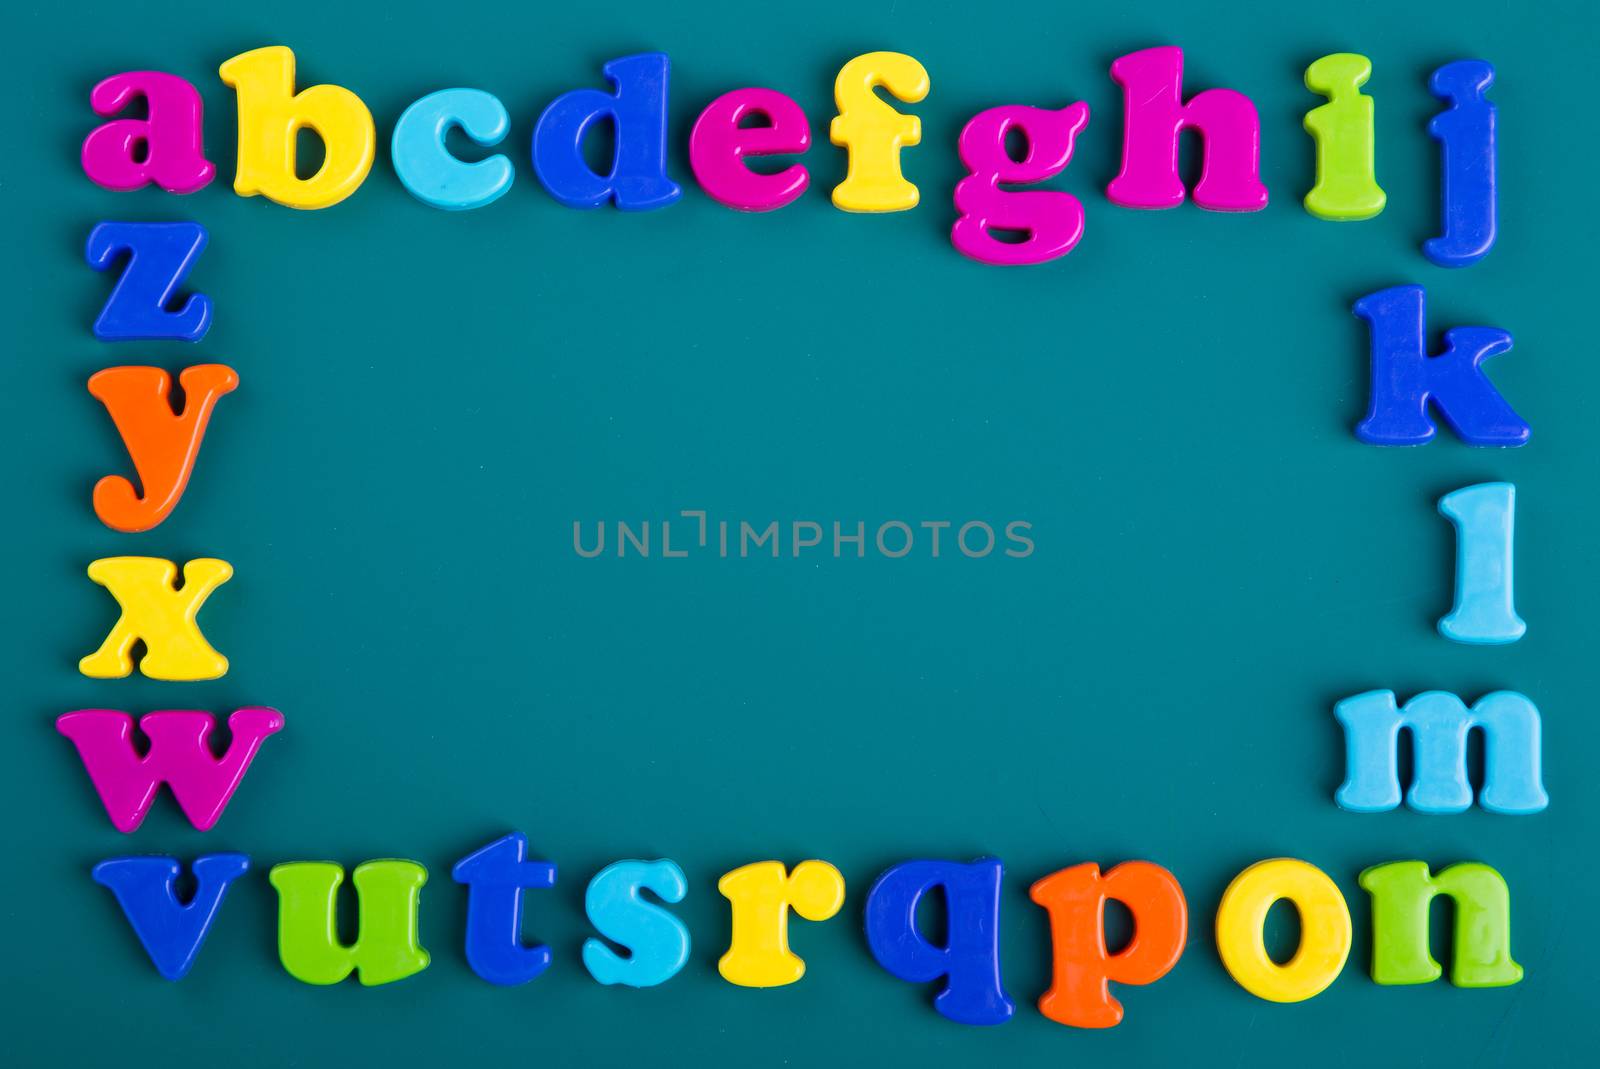 Frame of Colorful alphabet magnets on green background